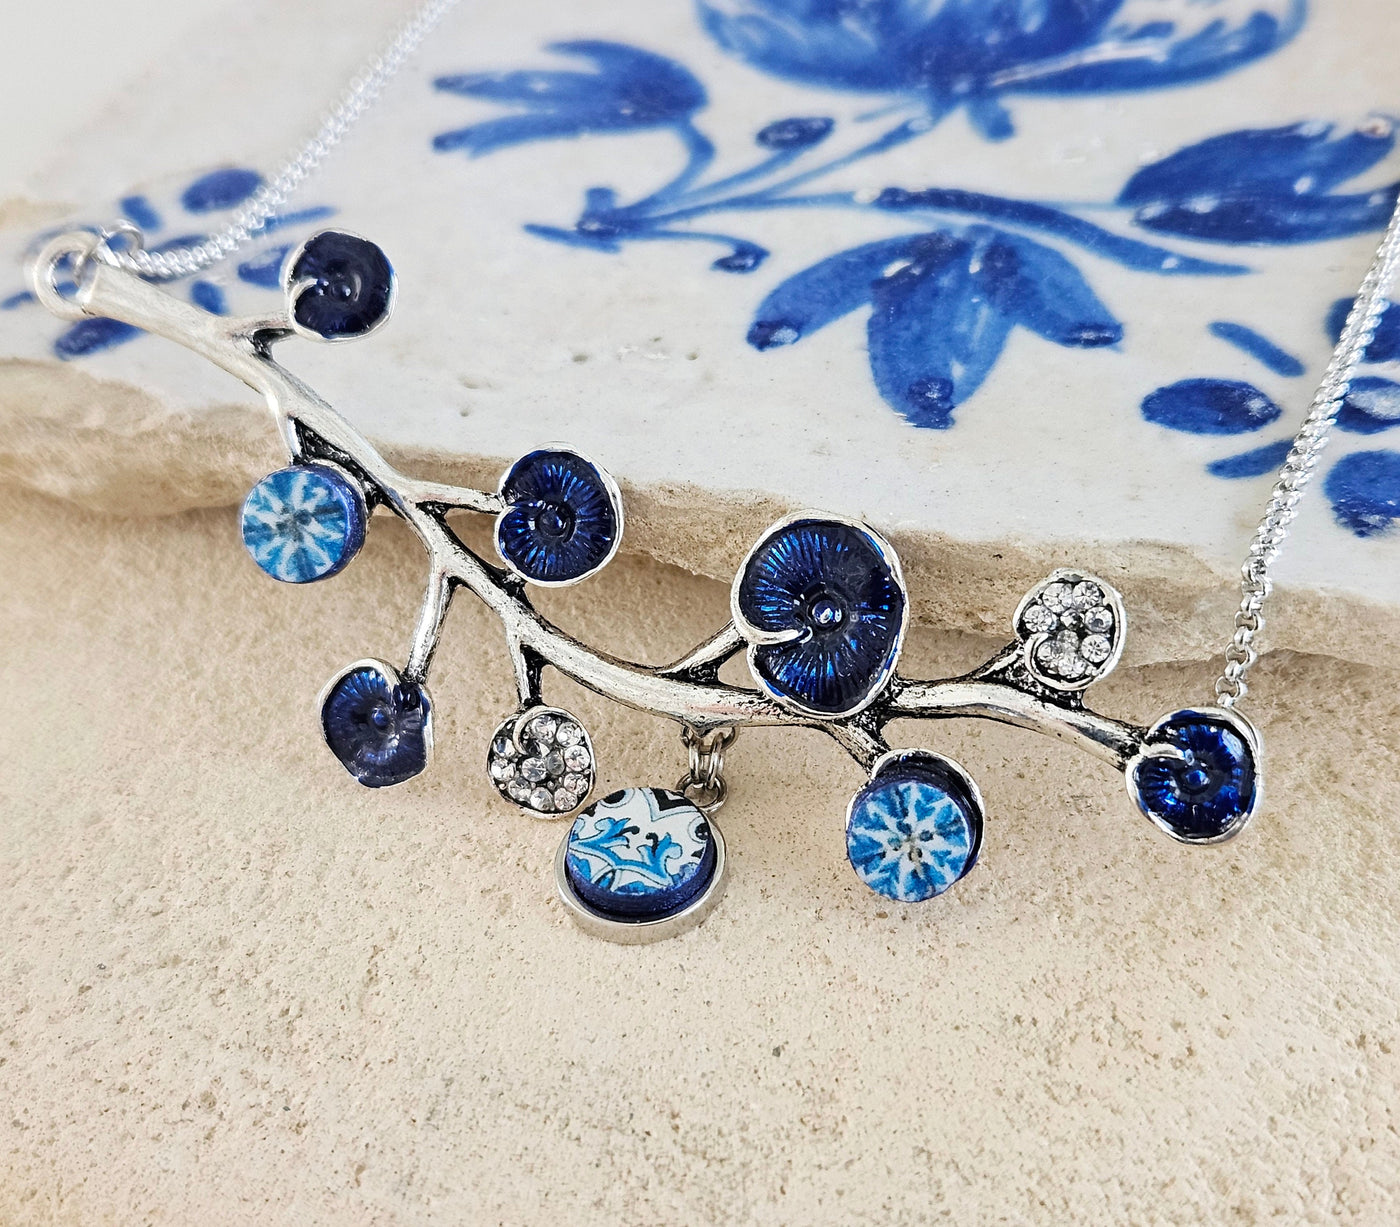 BLUE Portugal Antique Tile SILVER Branch Azulejo Necklace Lariat Tile Pendant Handmade Jewelry Vintage Round Small Tile Necklace Woman Gift